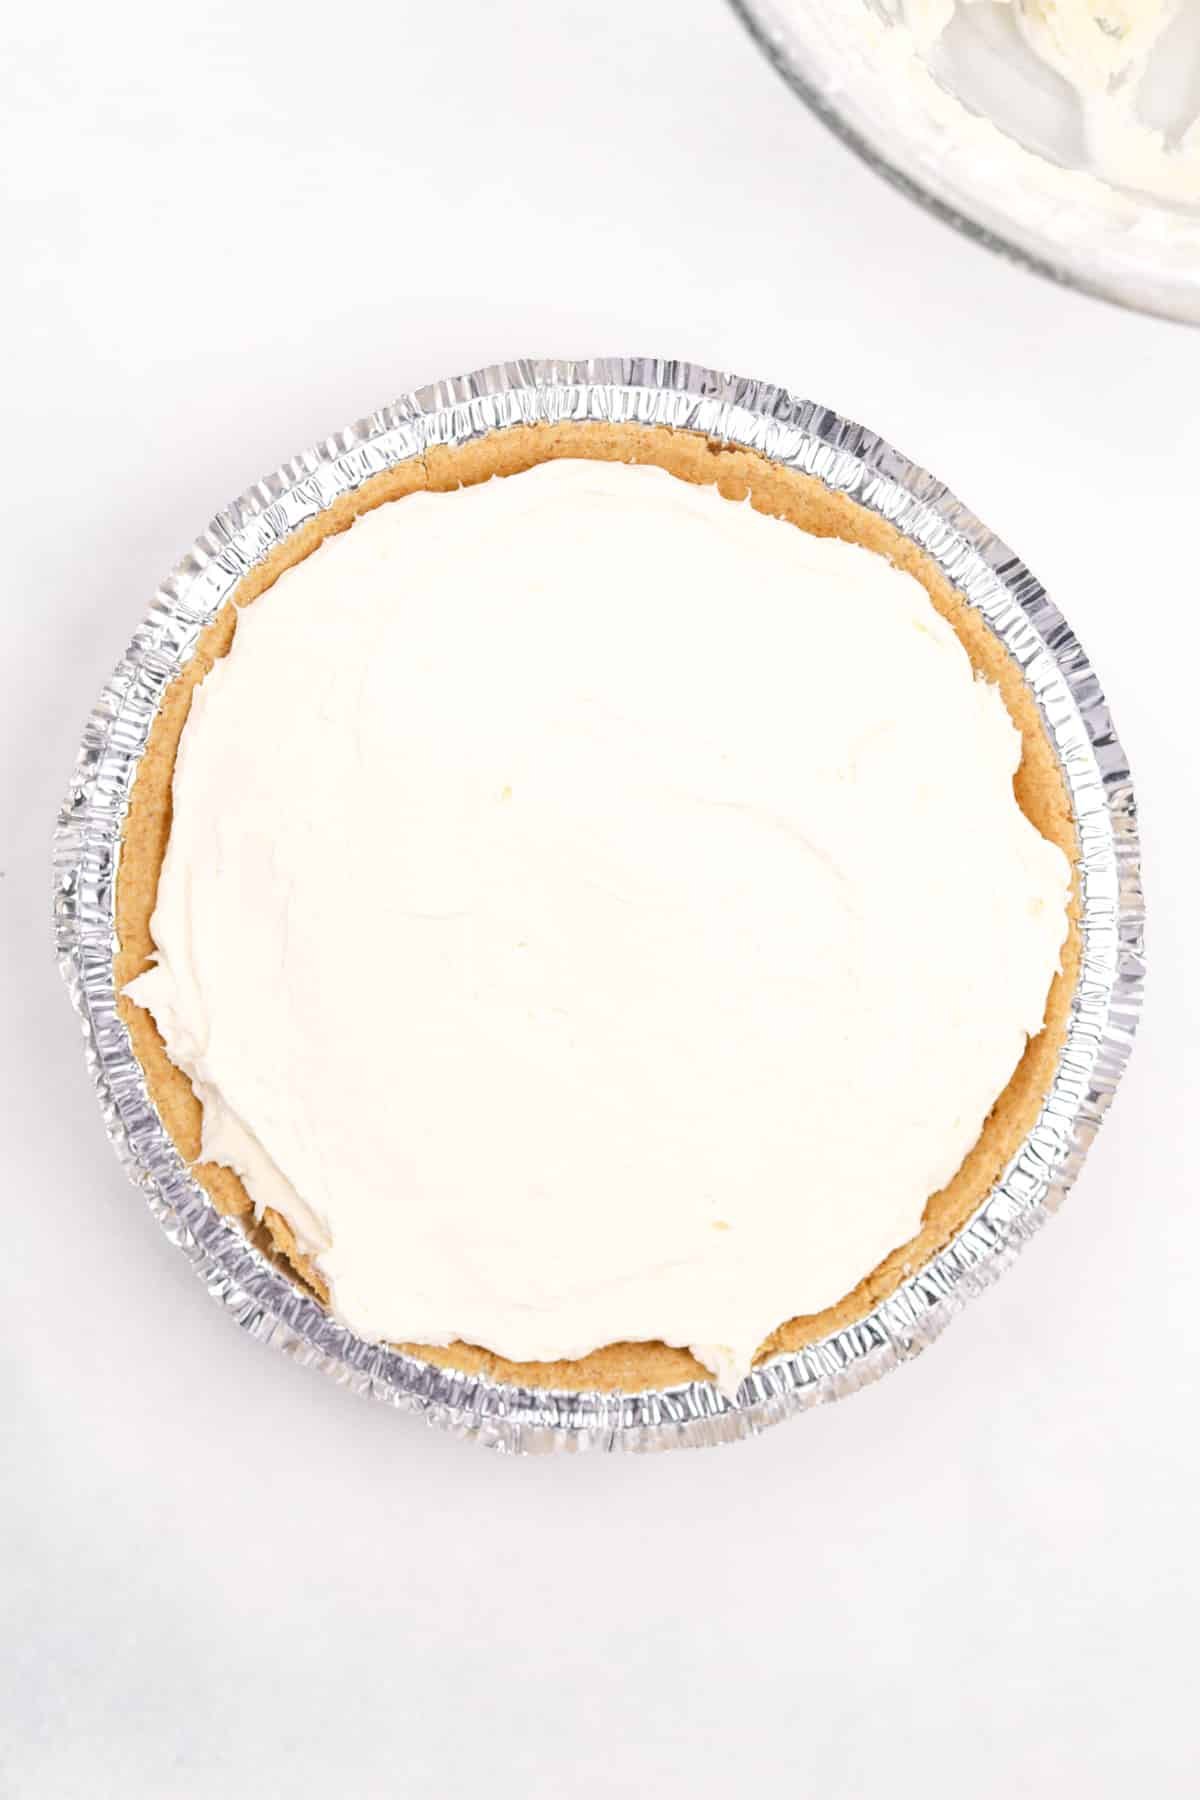 A premade graham cracker crust filled with cheesecake filling.